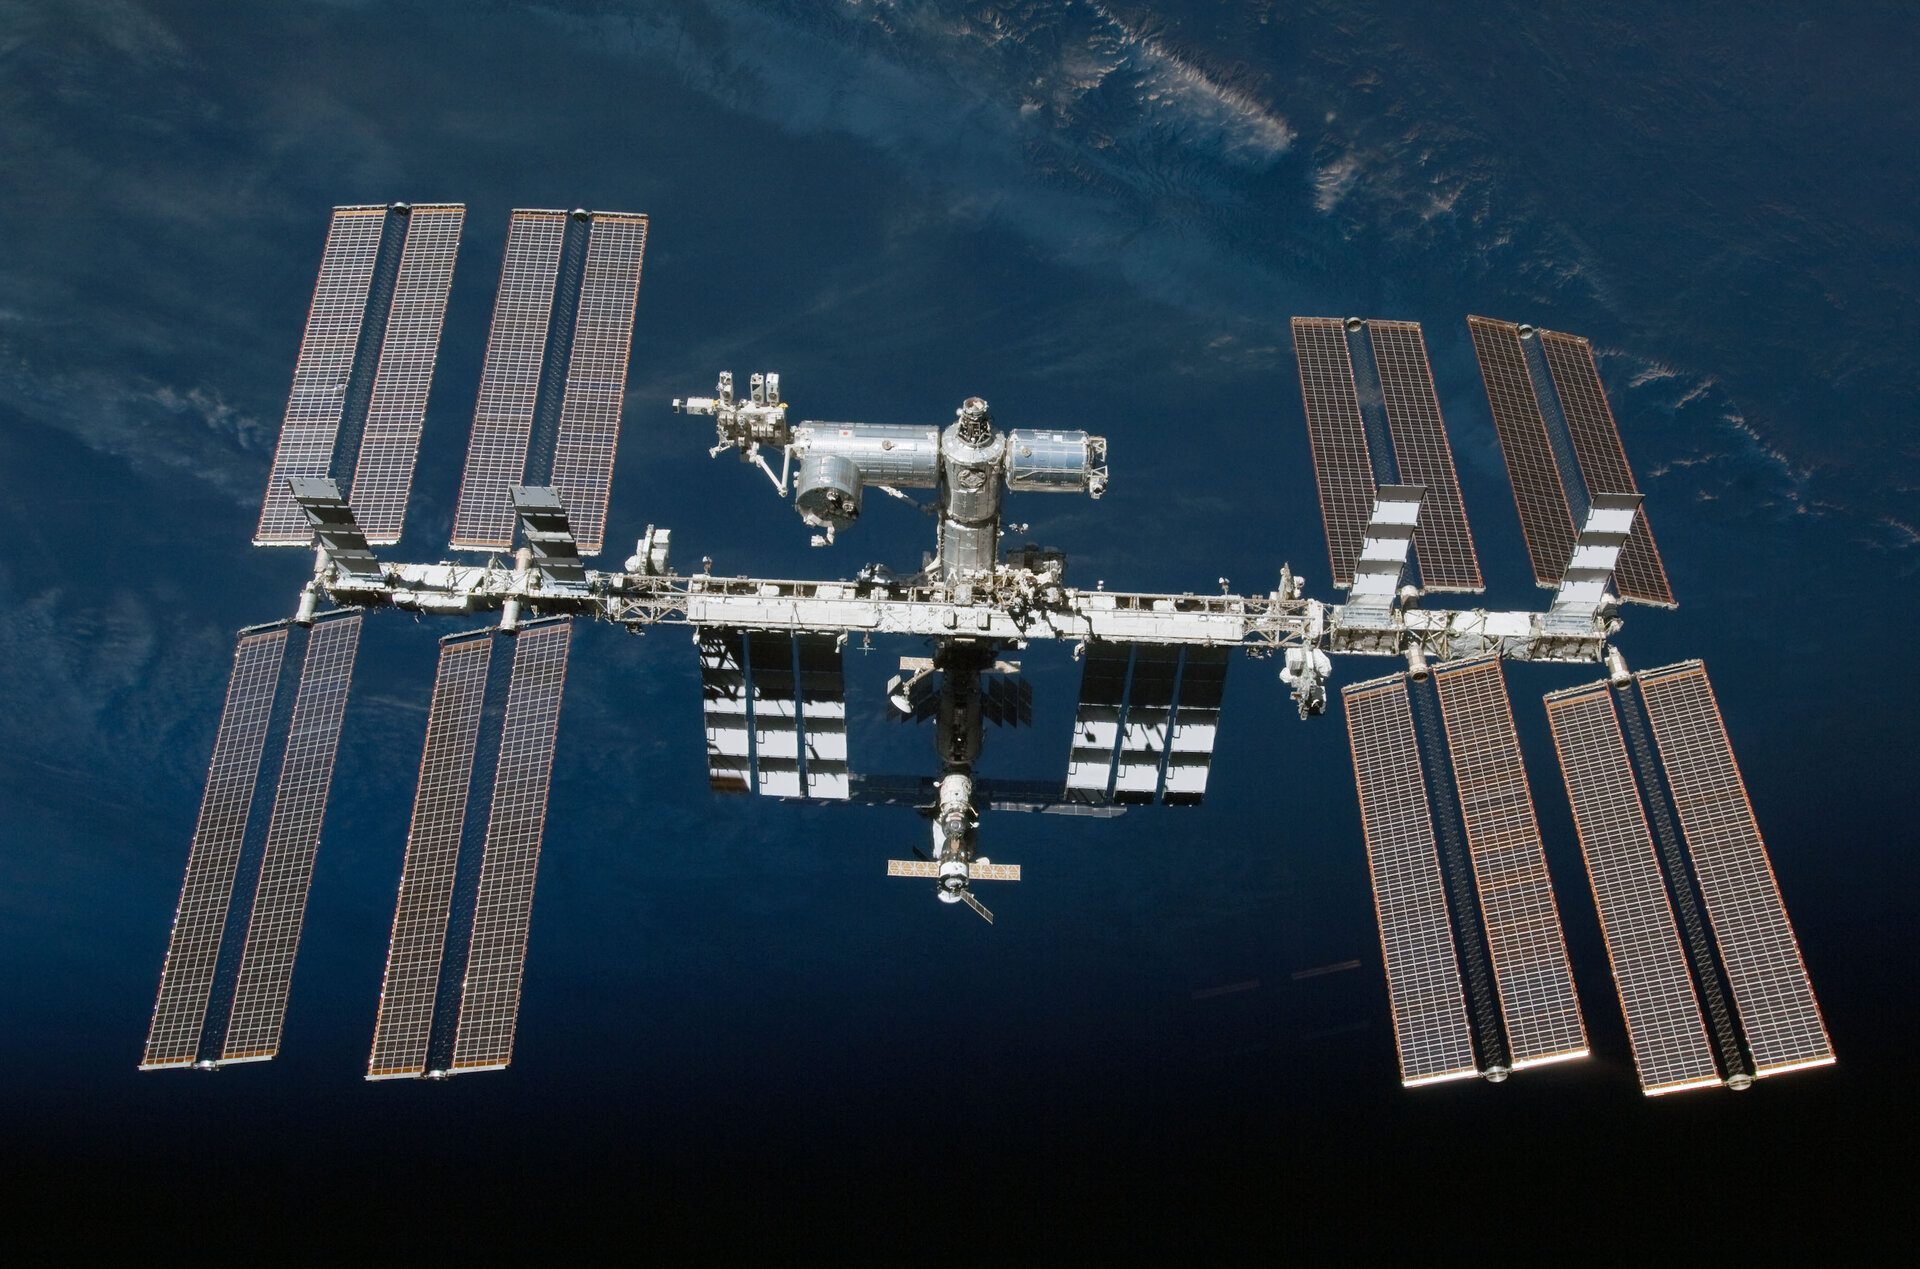 ISS: a unique achievement in aerospace engineering